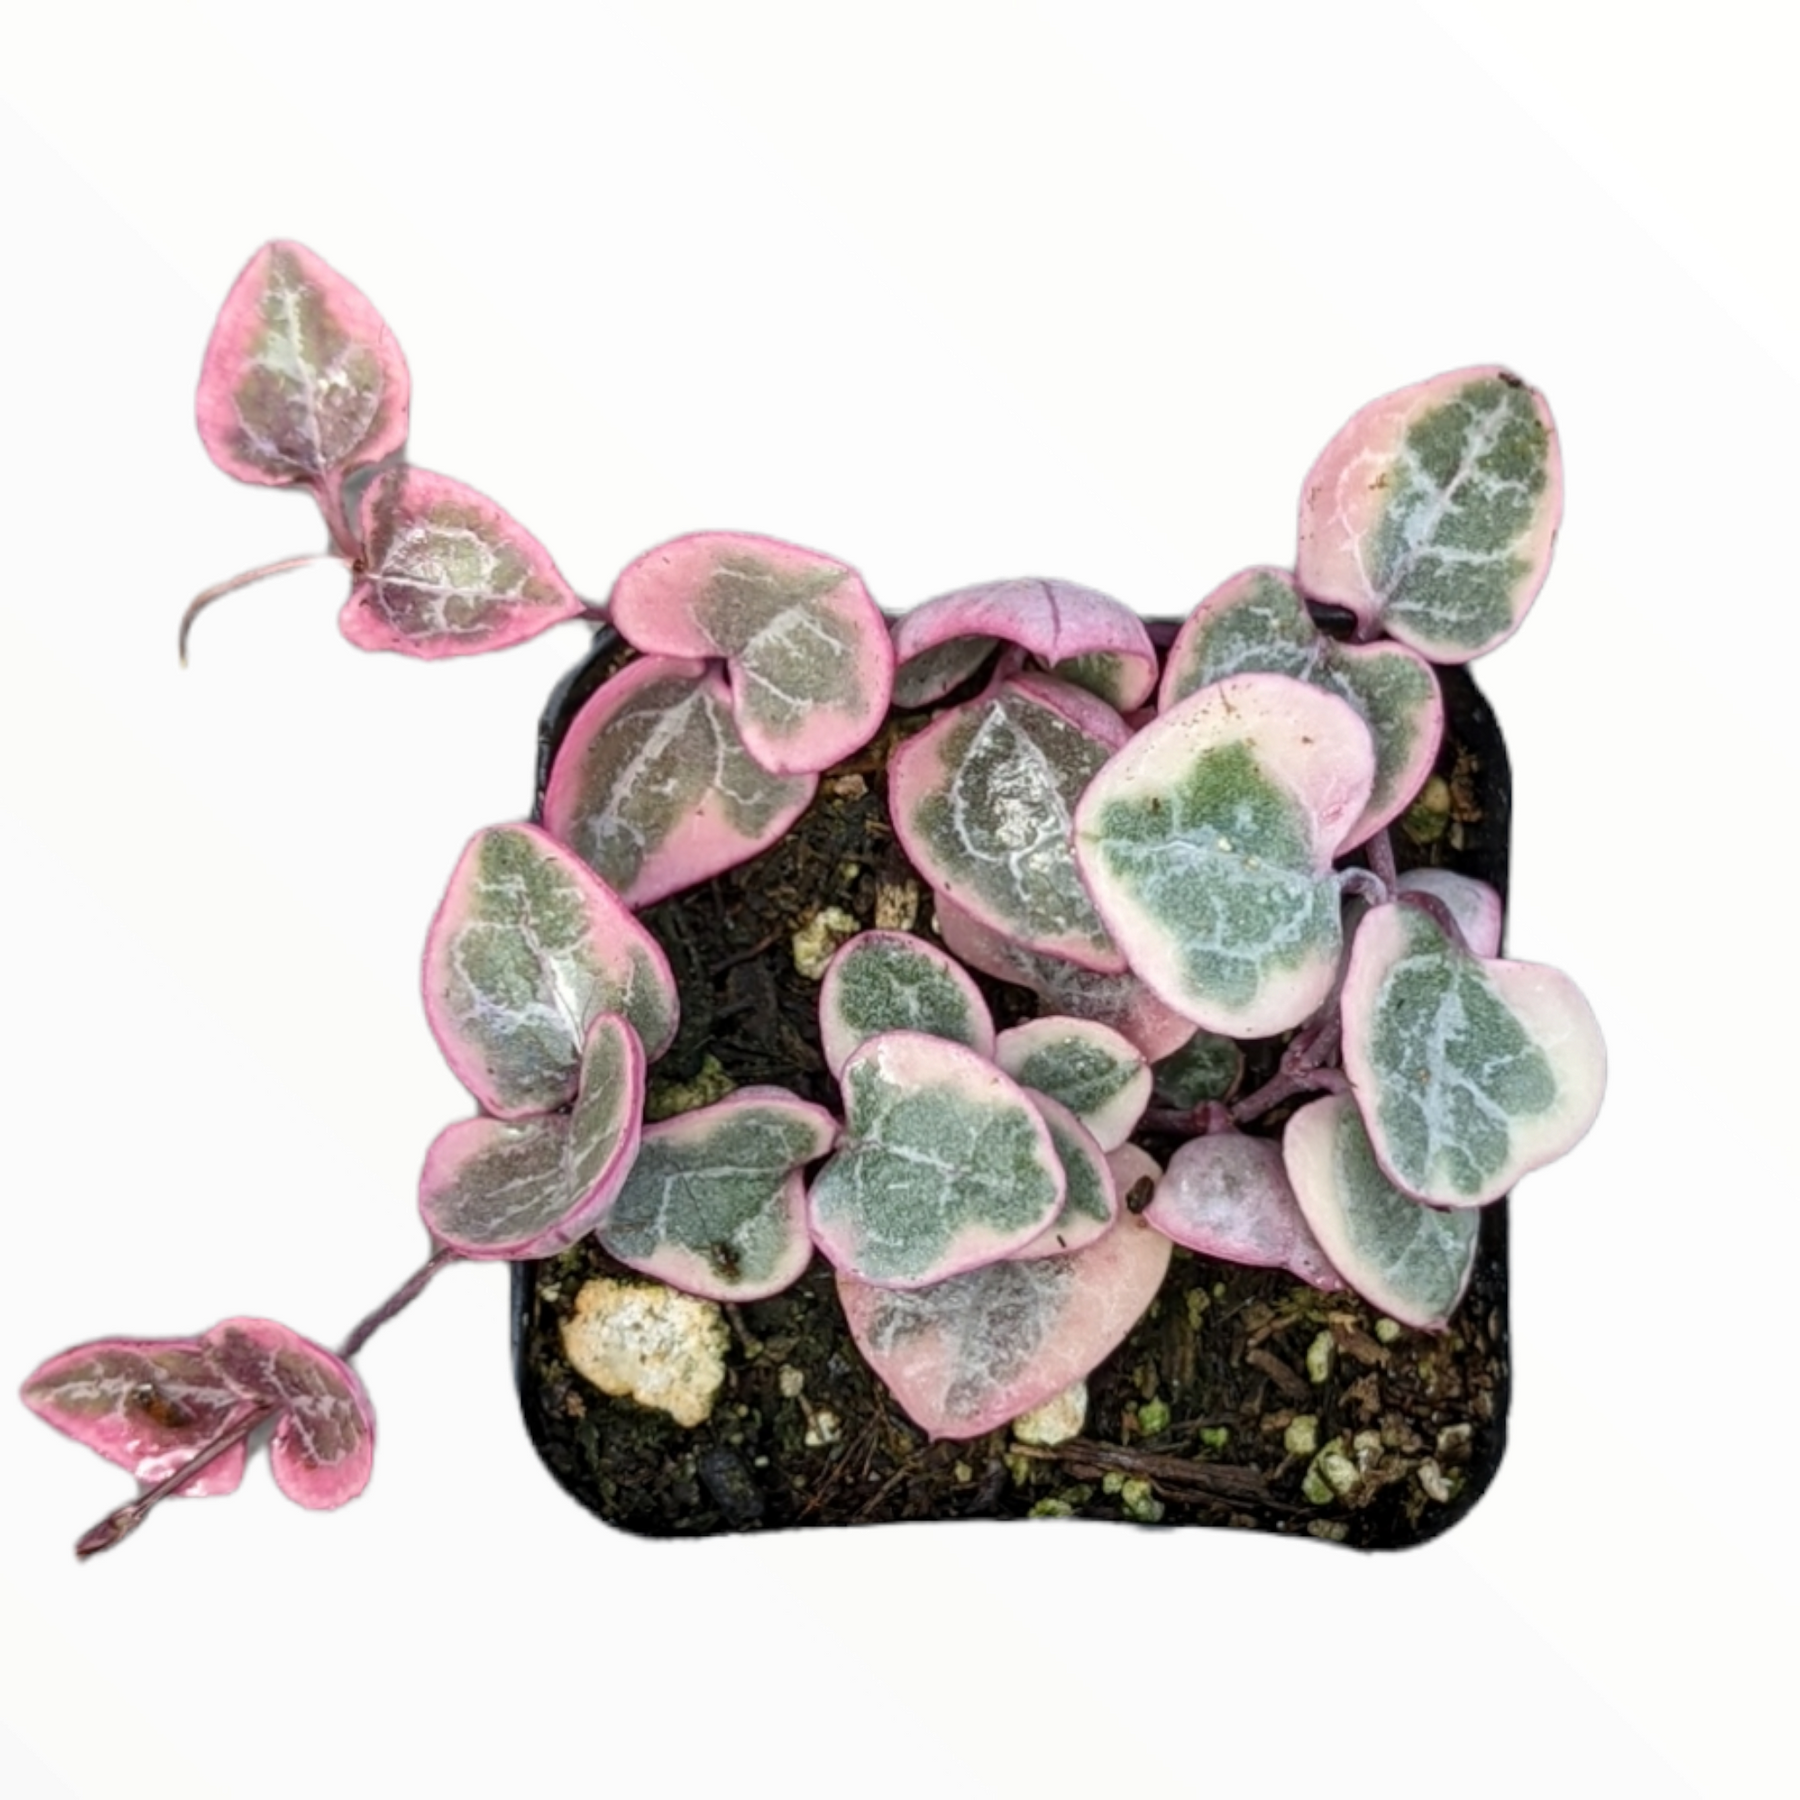 Ceropegia woodii Variegated String of Hearts [large]